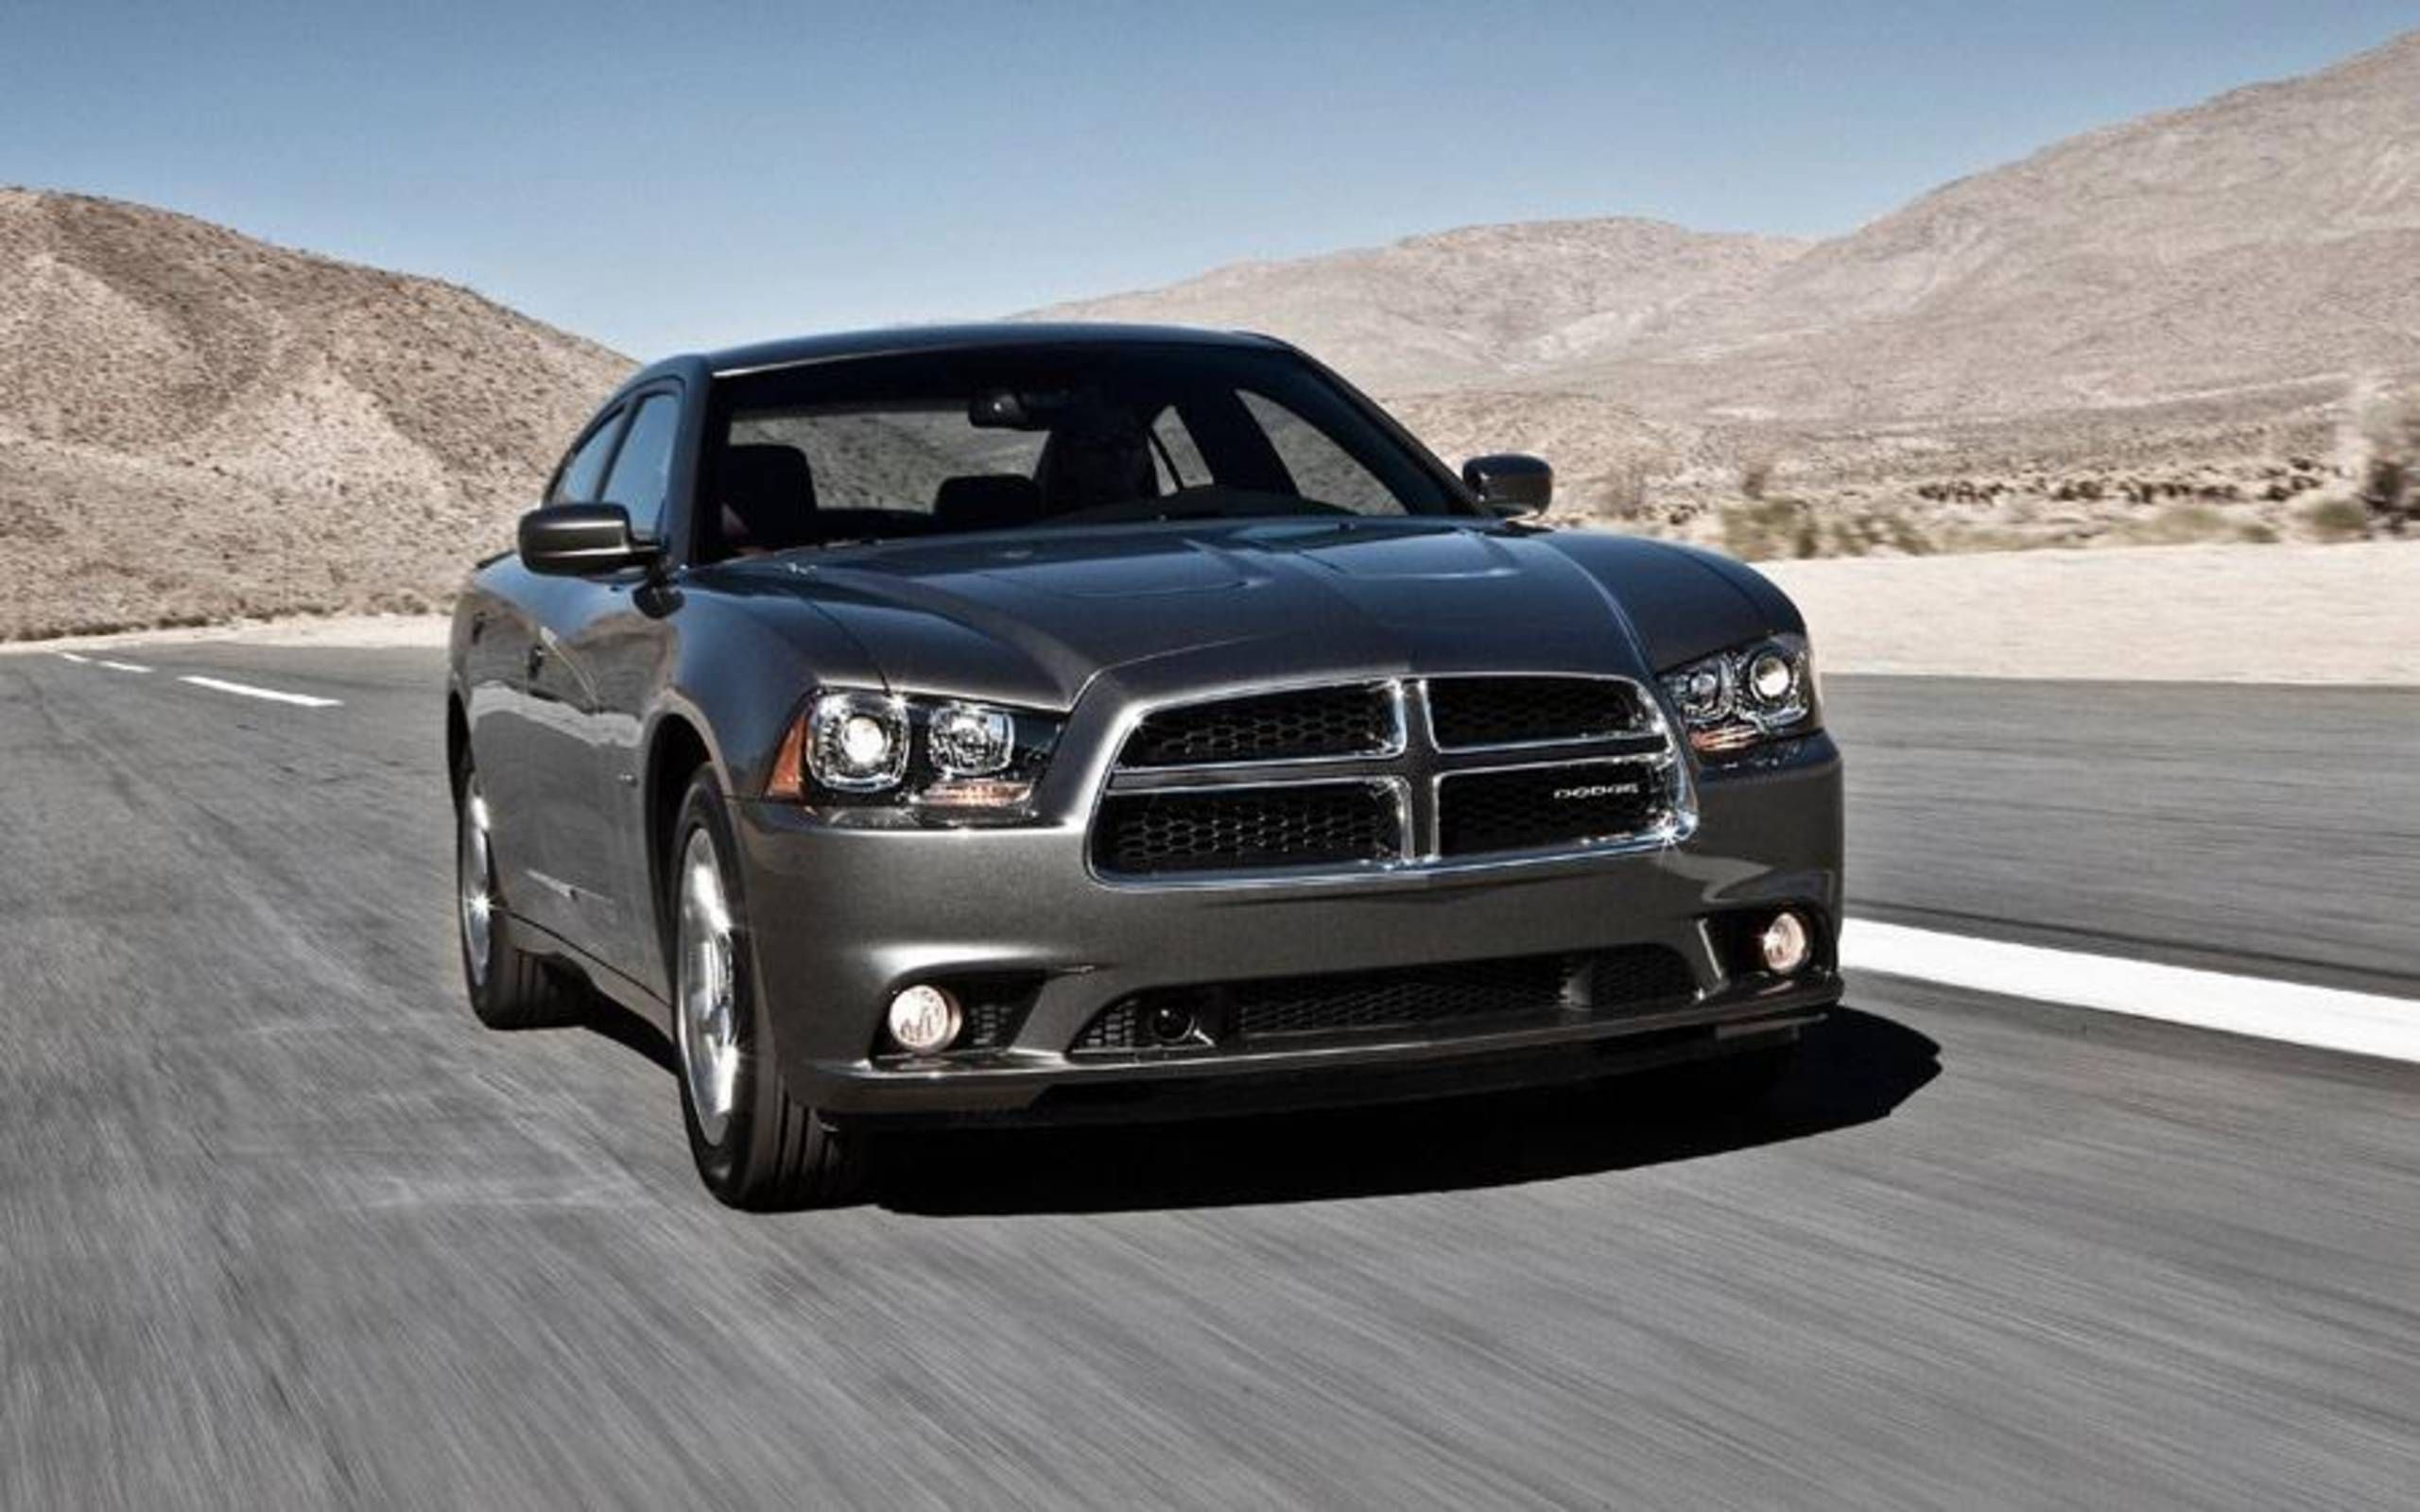 2013 Dodge Charger R/T review notes